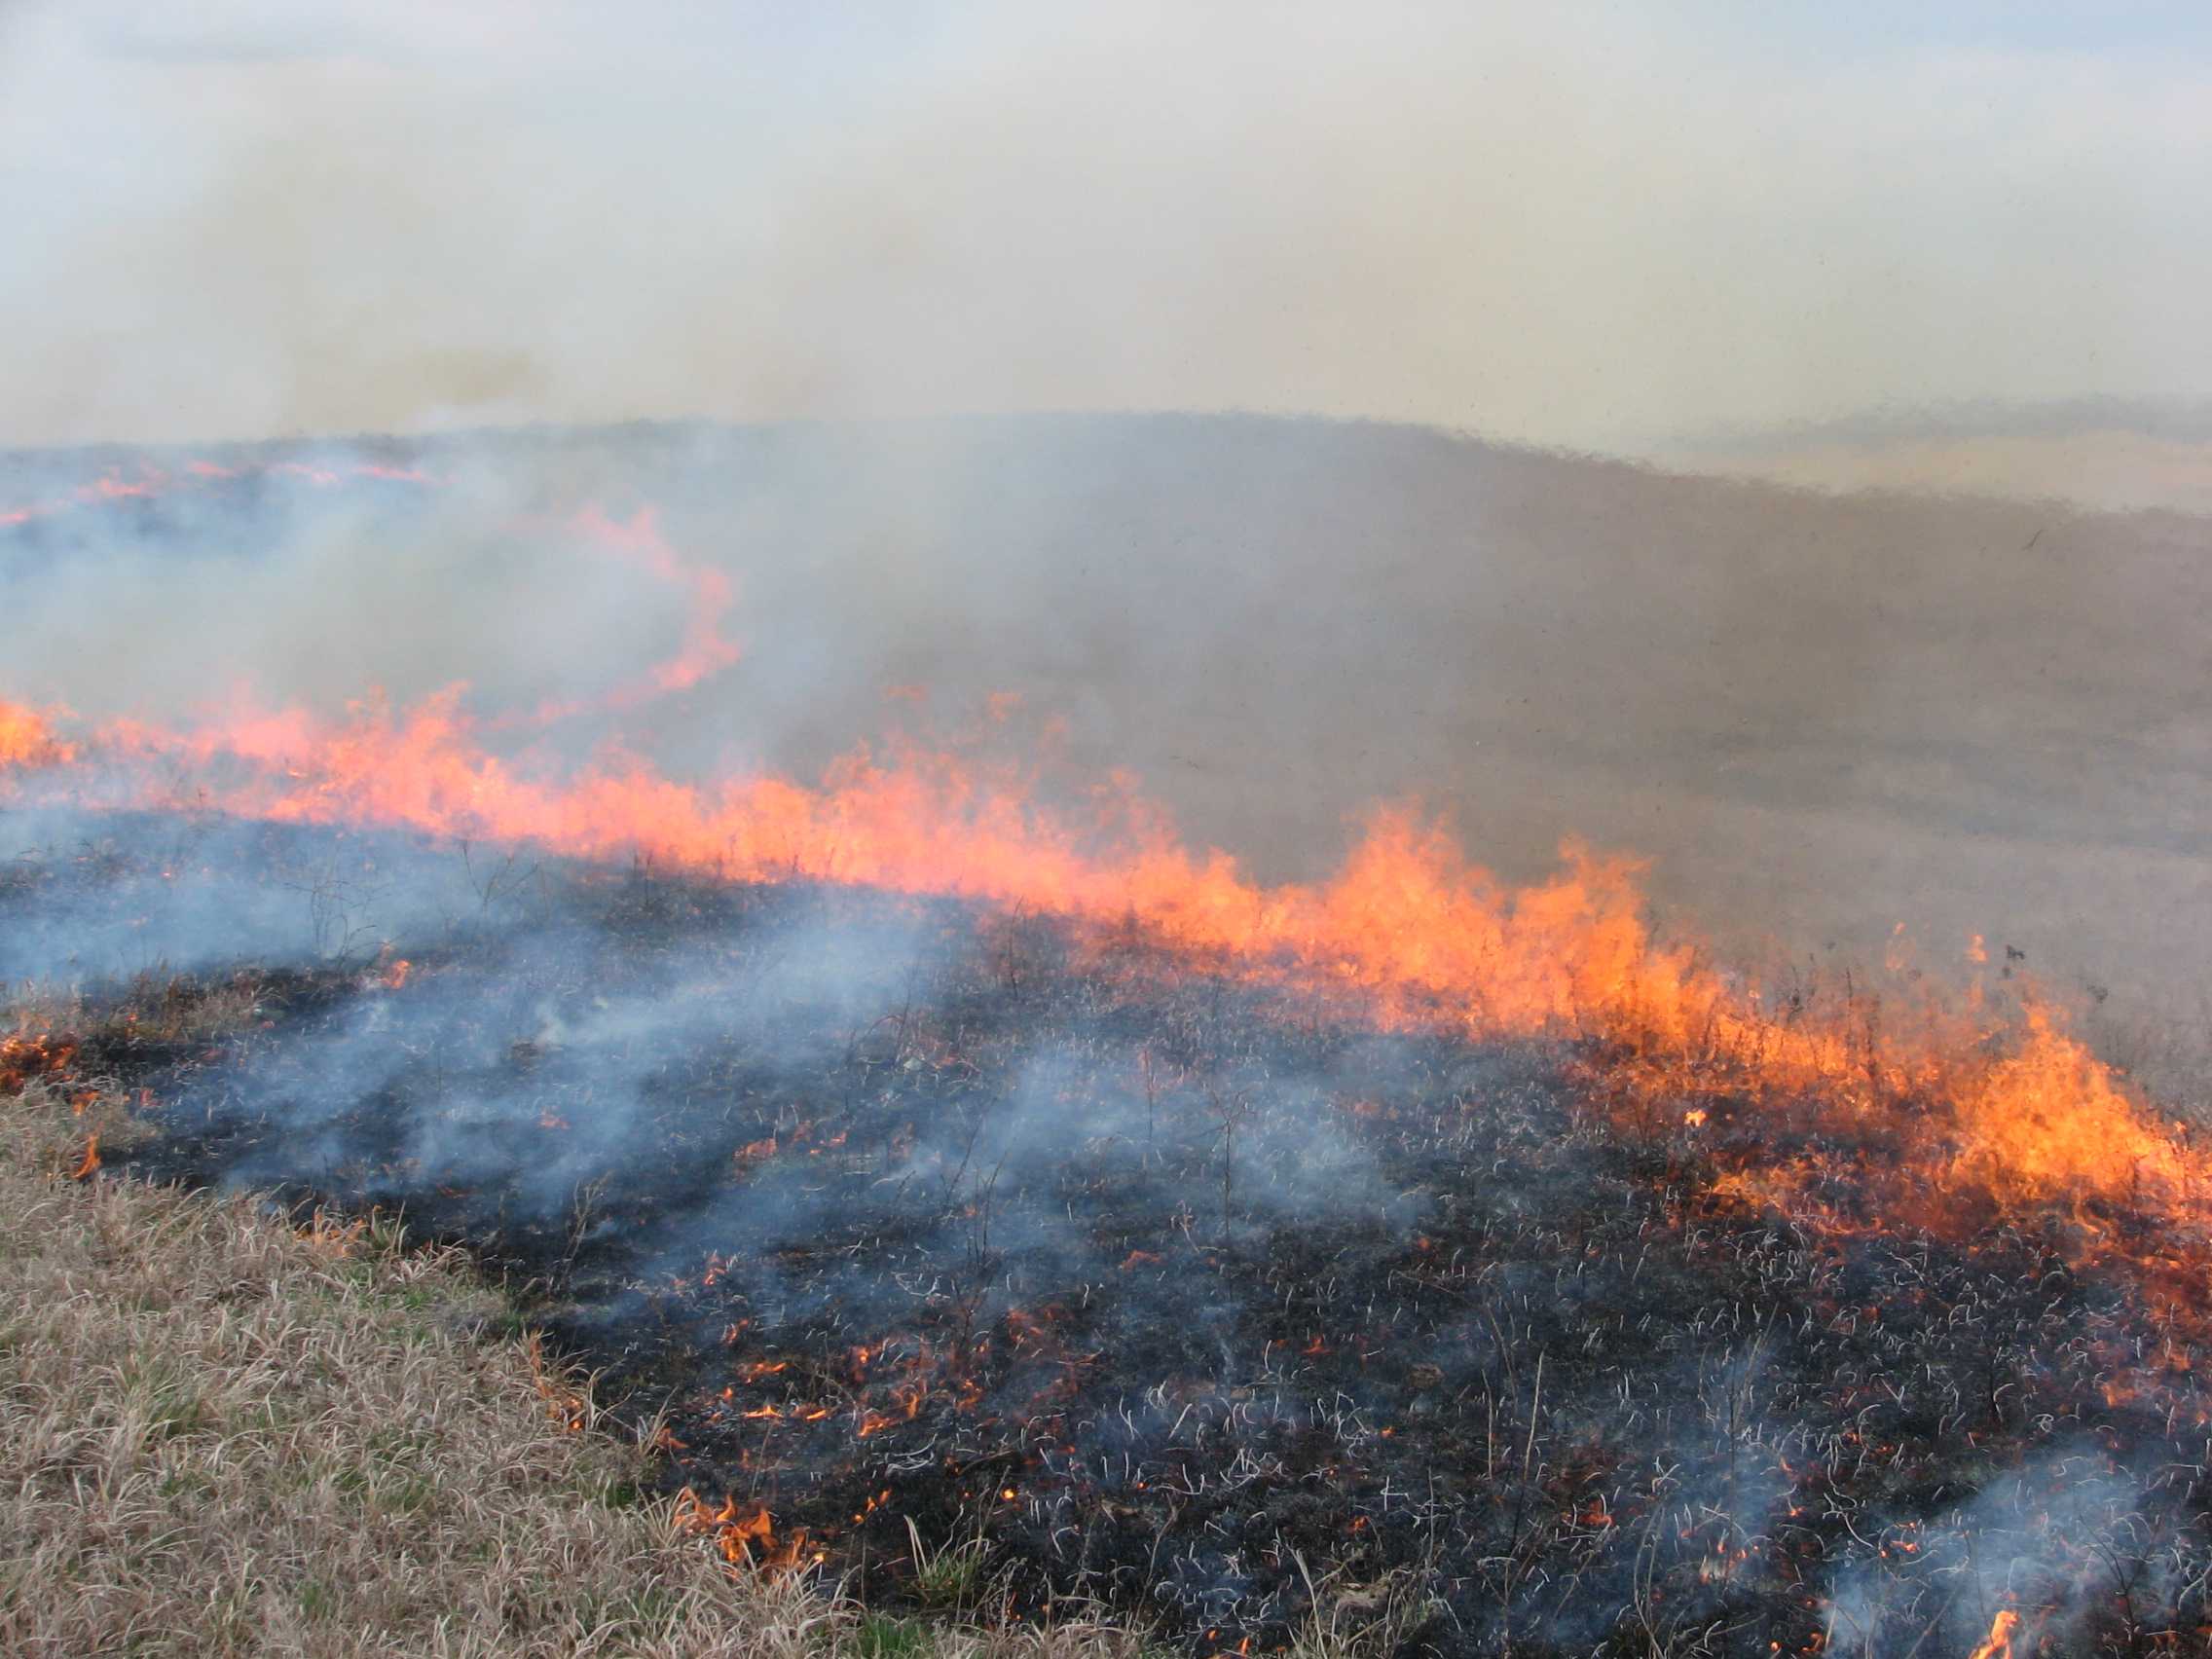 Prescribed fire on the prairie